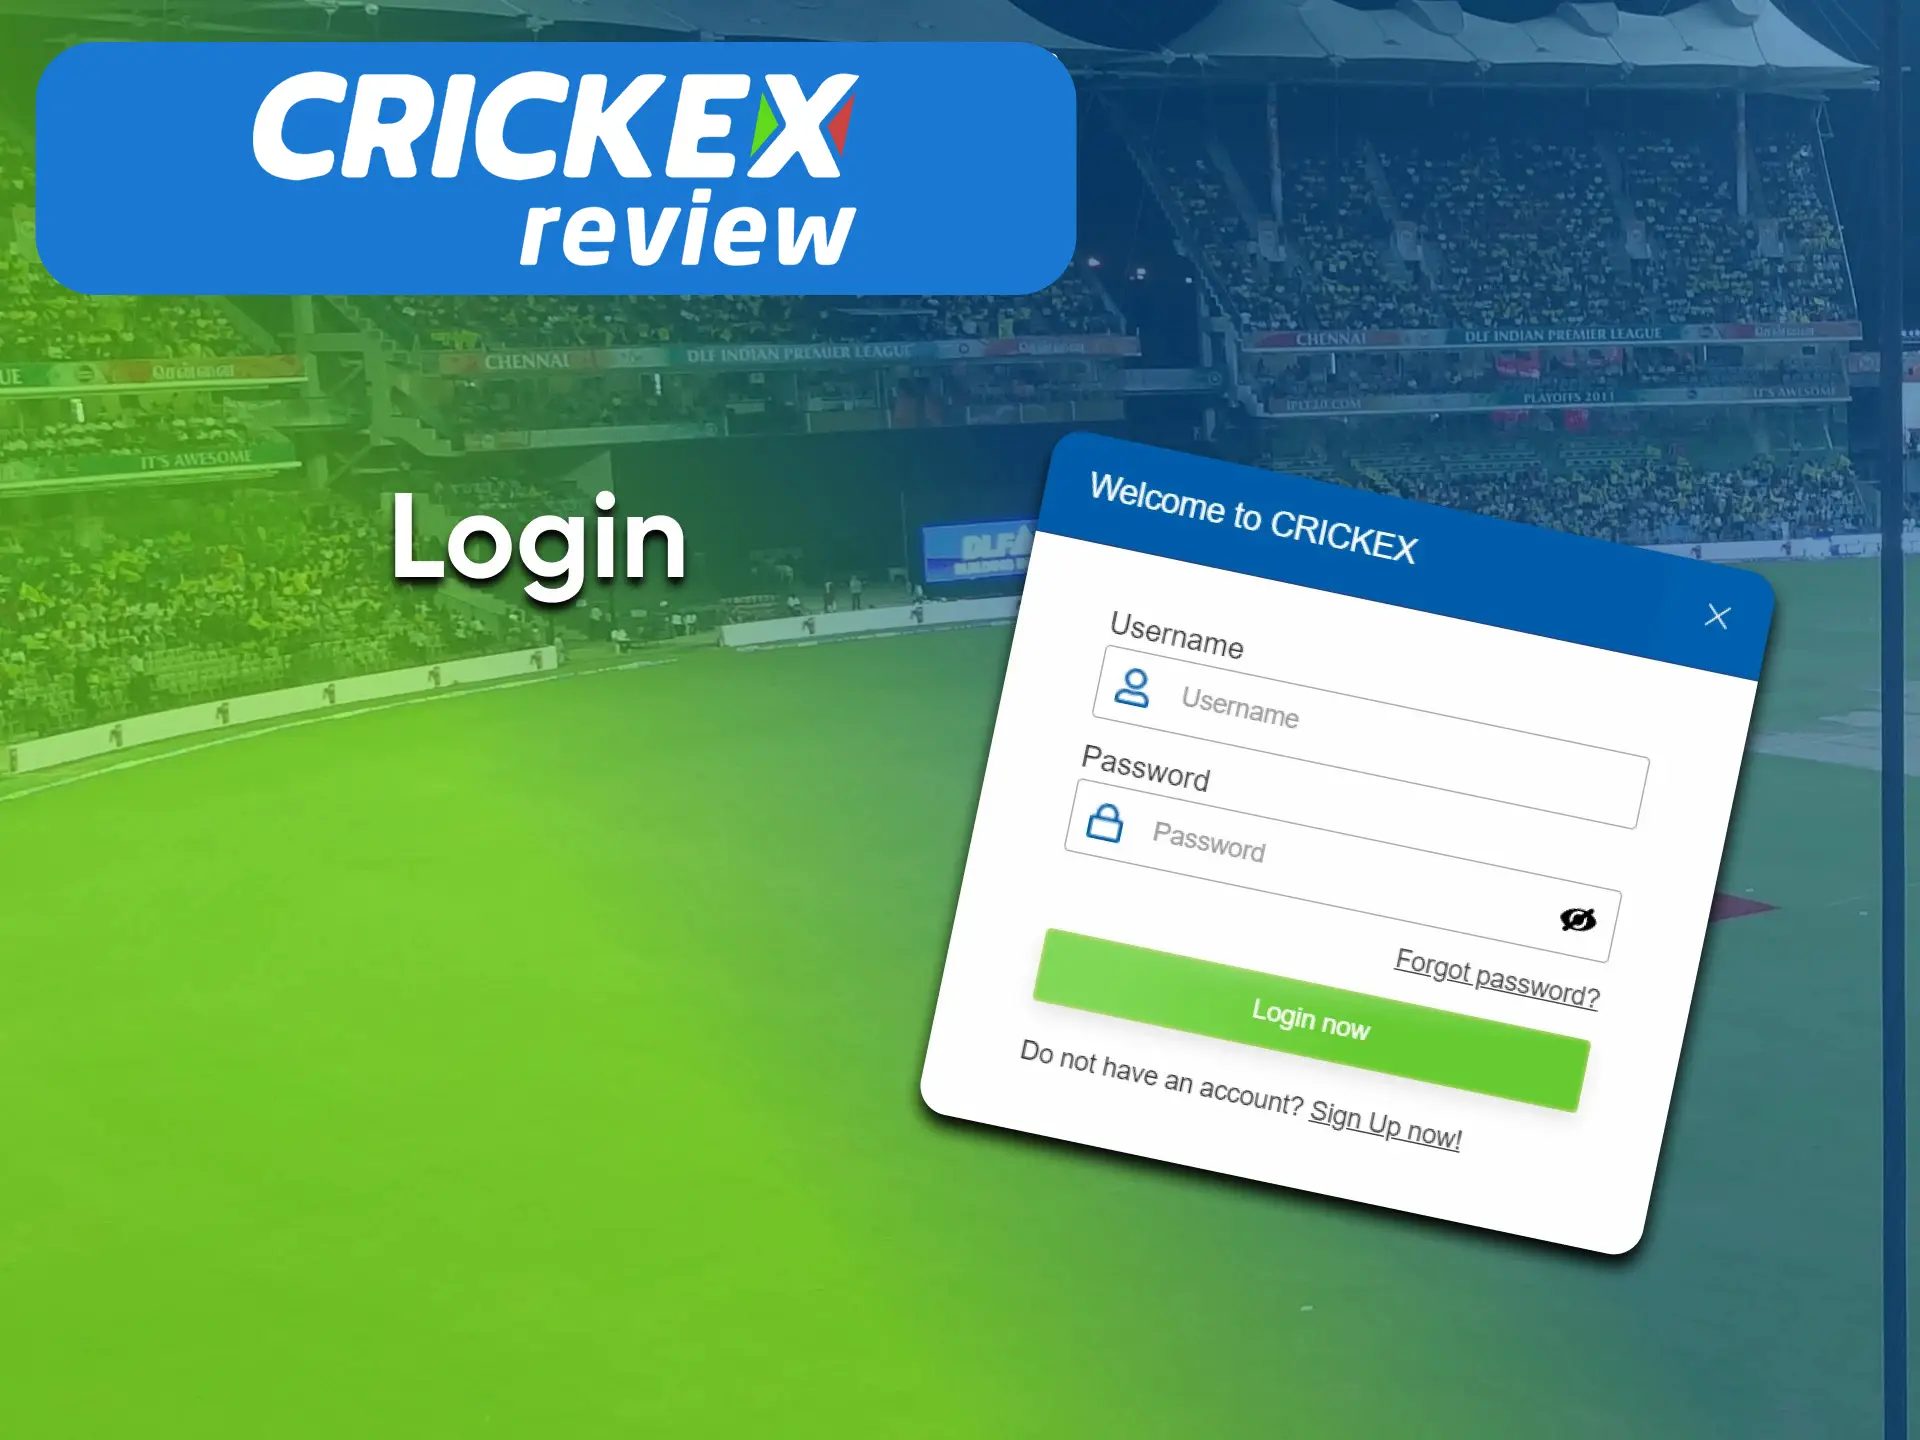 If you have a Crickex account, please login to play casino games and bet.